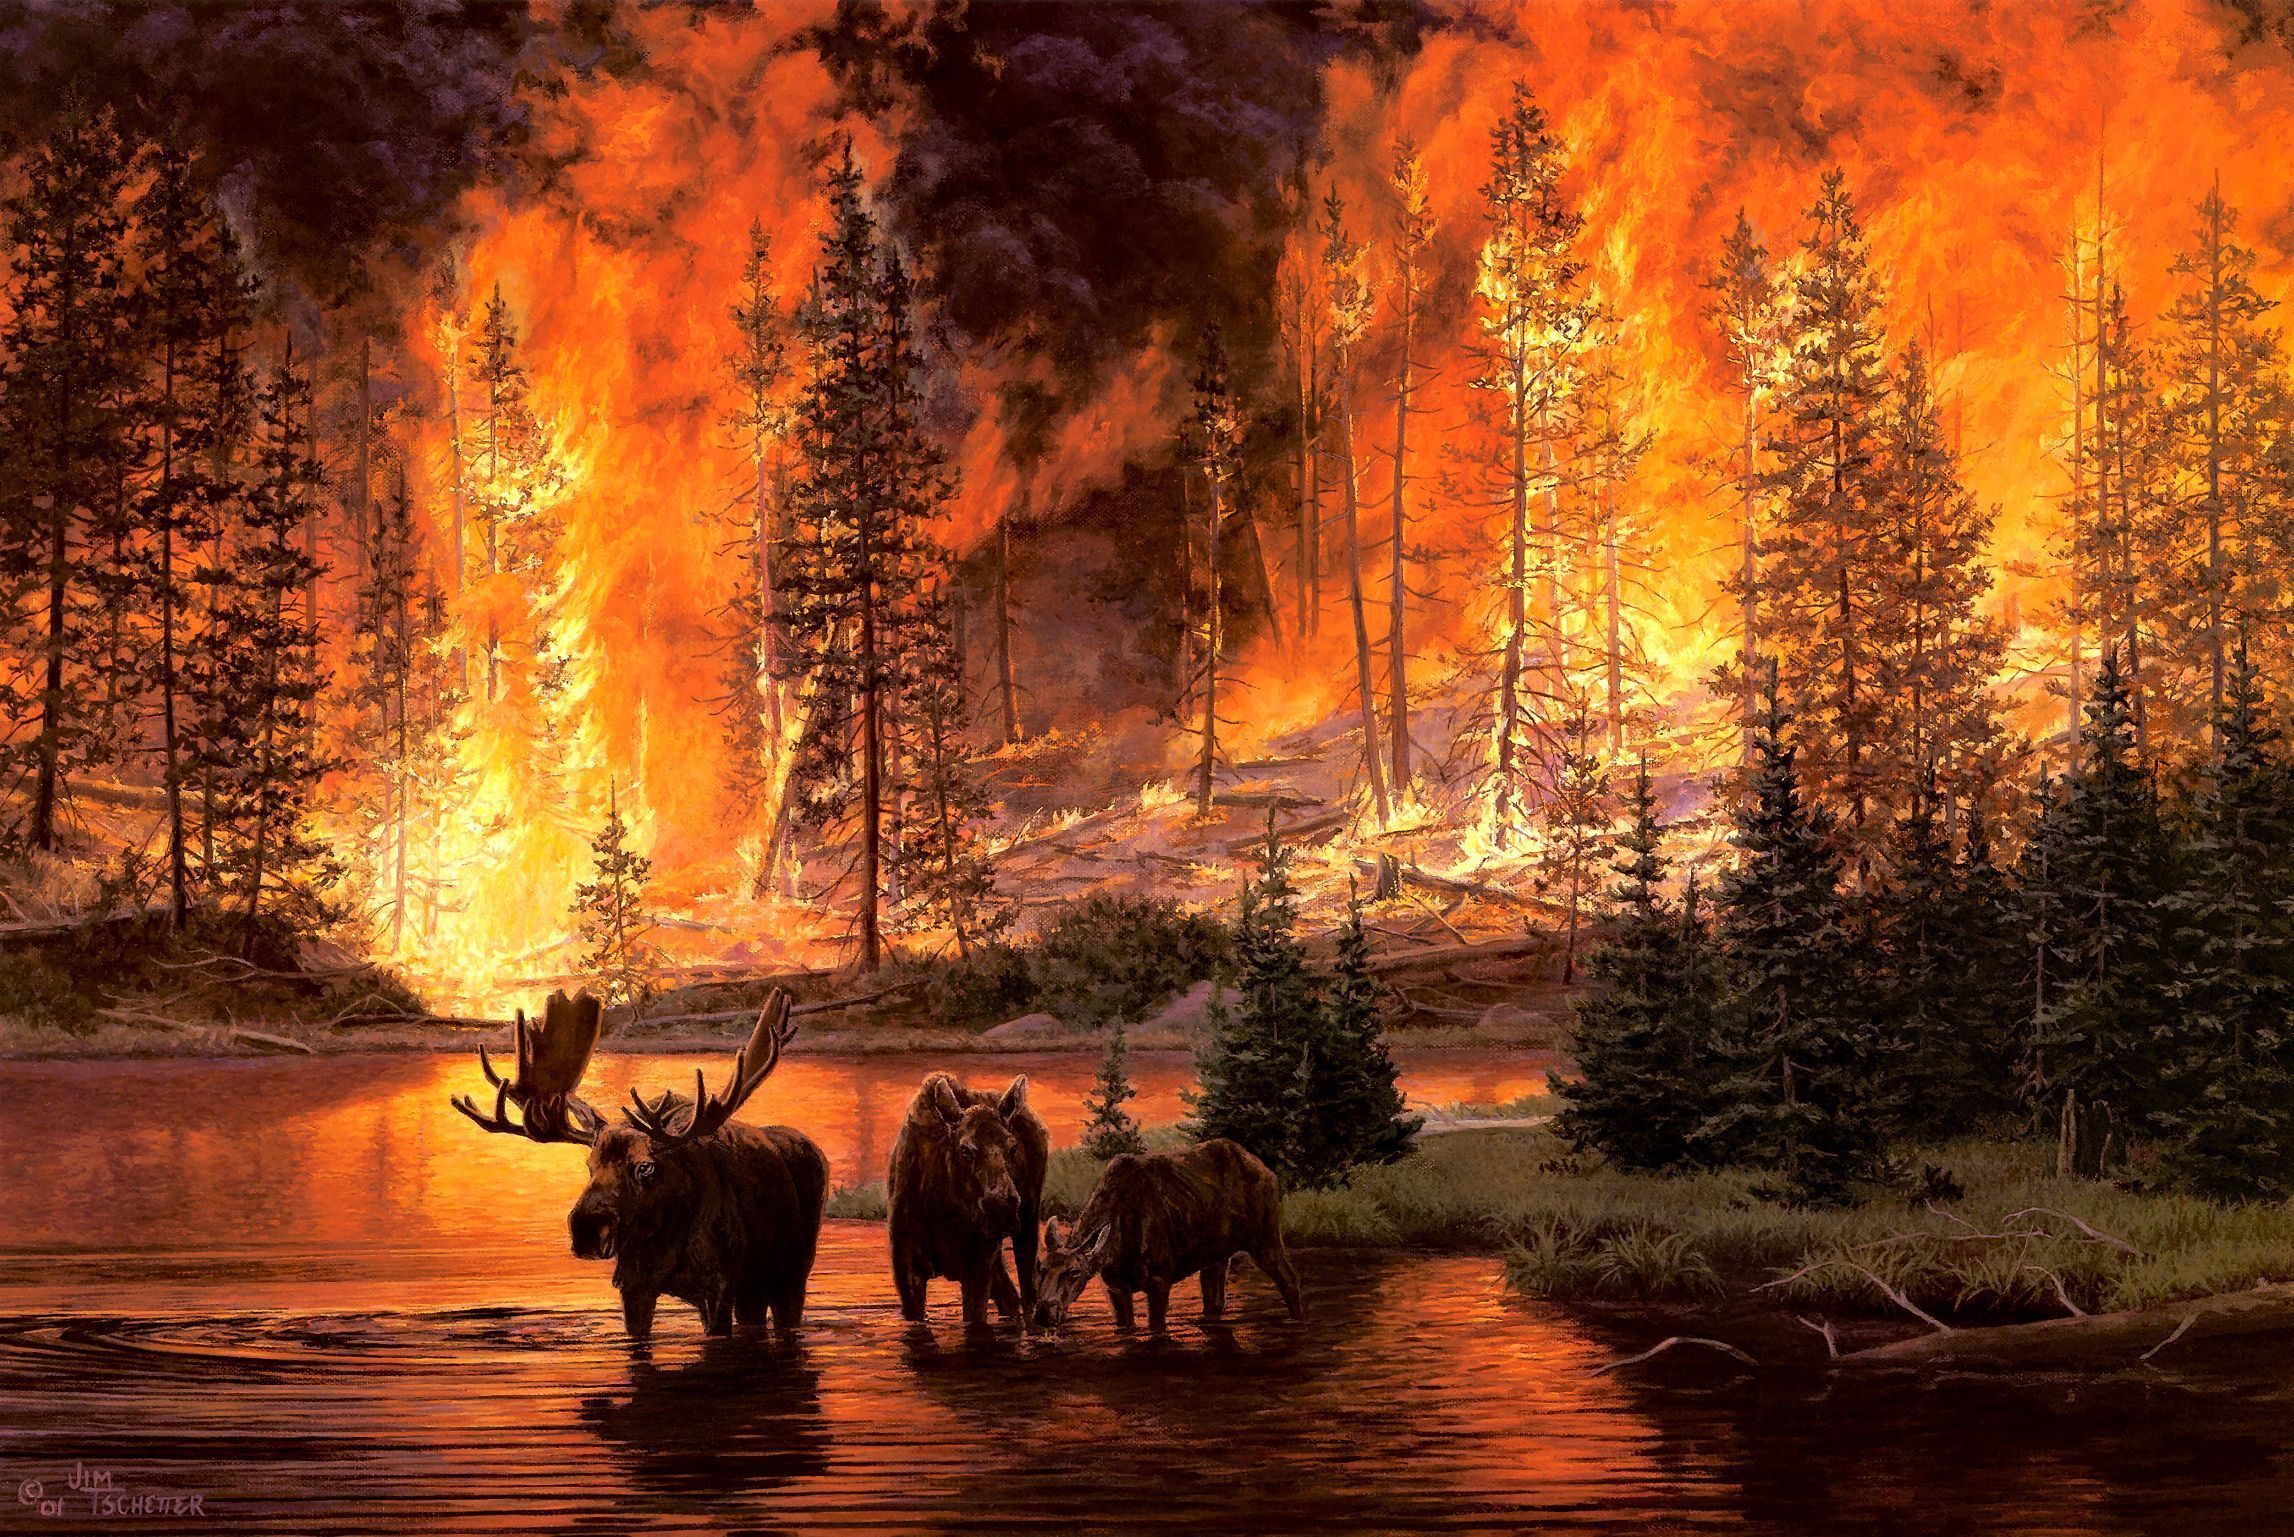 jim tschetter, Jim, Tschetter, Animals, Moose, Nature, Paintings, Artistic, Art, Landscapes, Fire, Flames, Trees, Forests, Situation Wallpaper